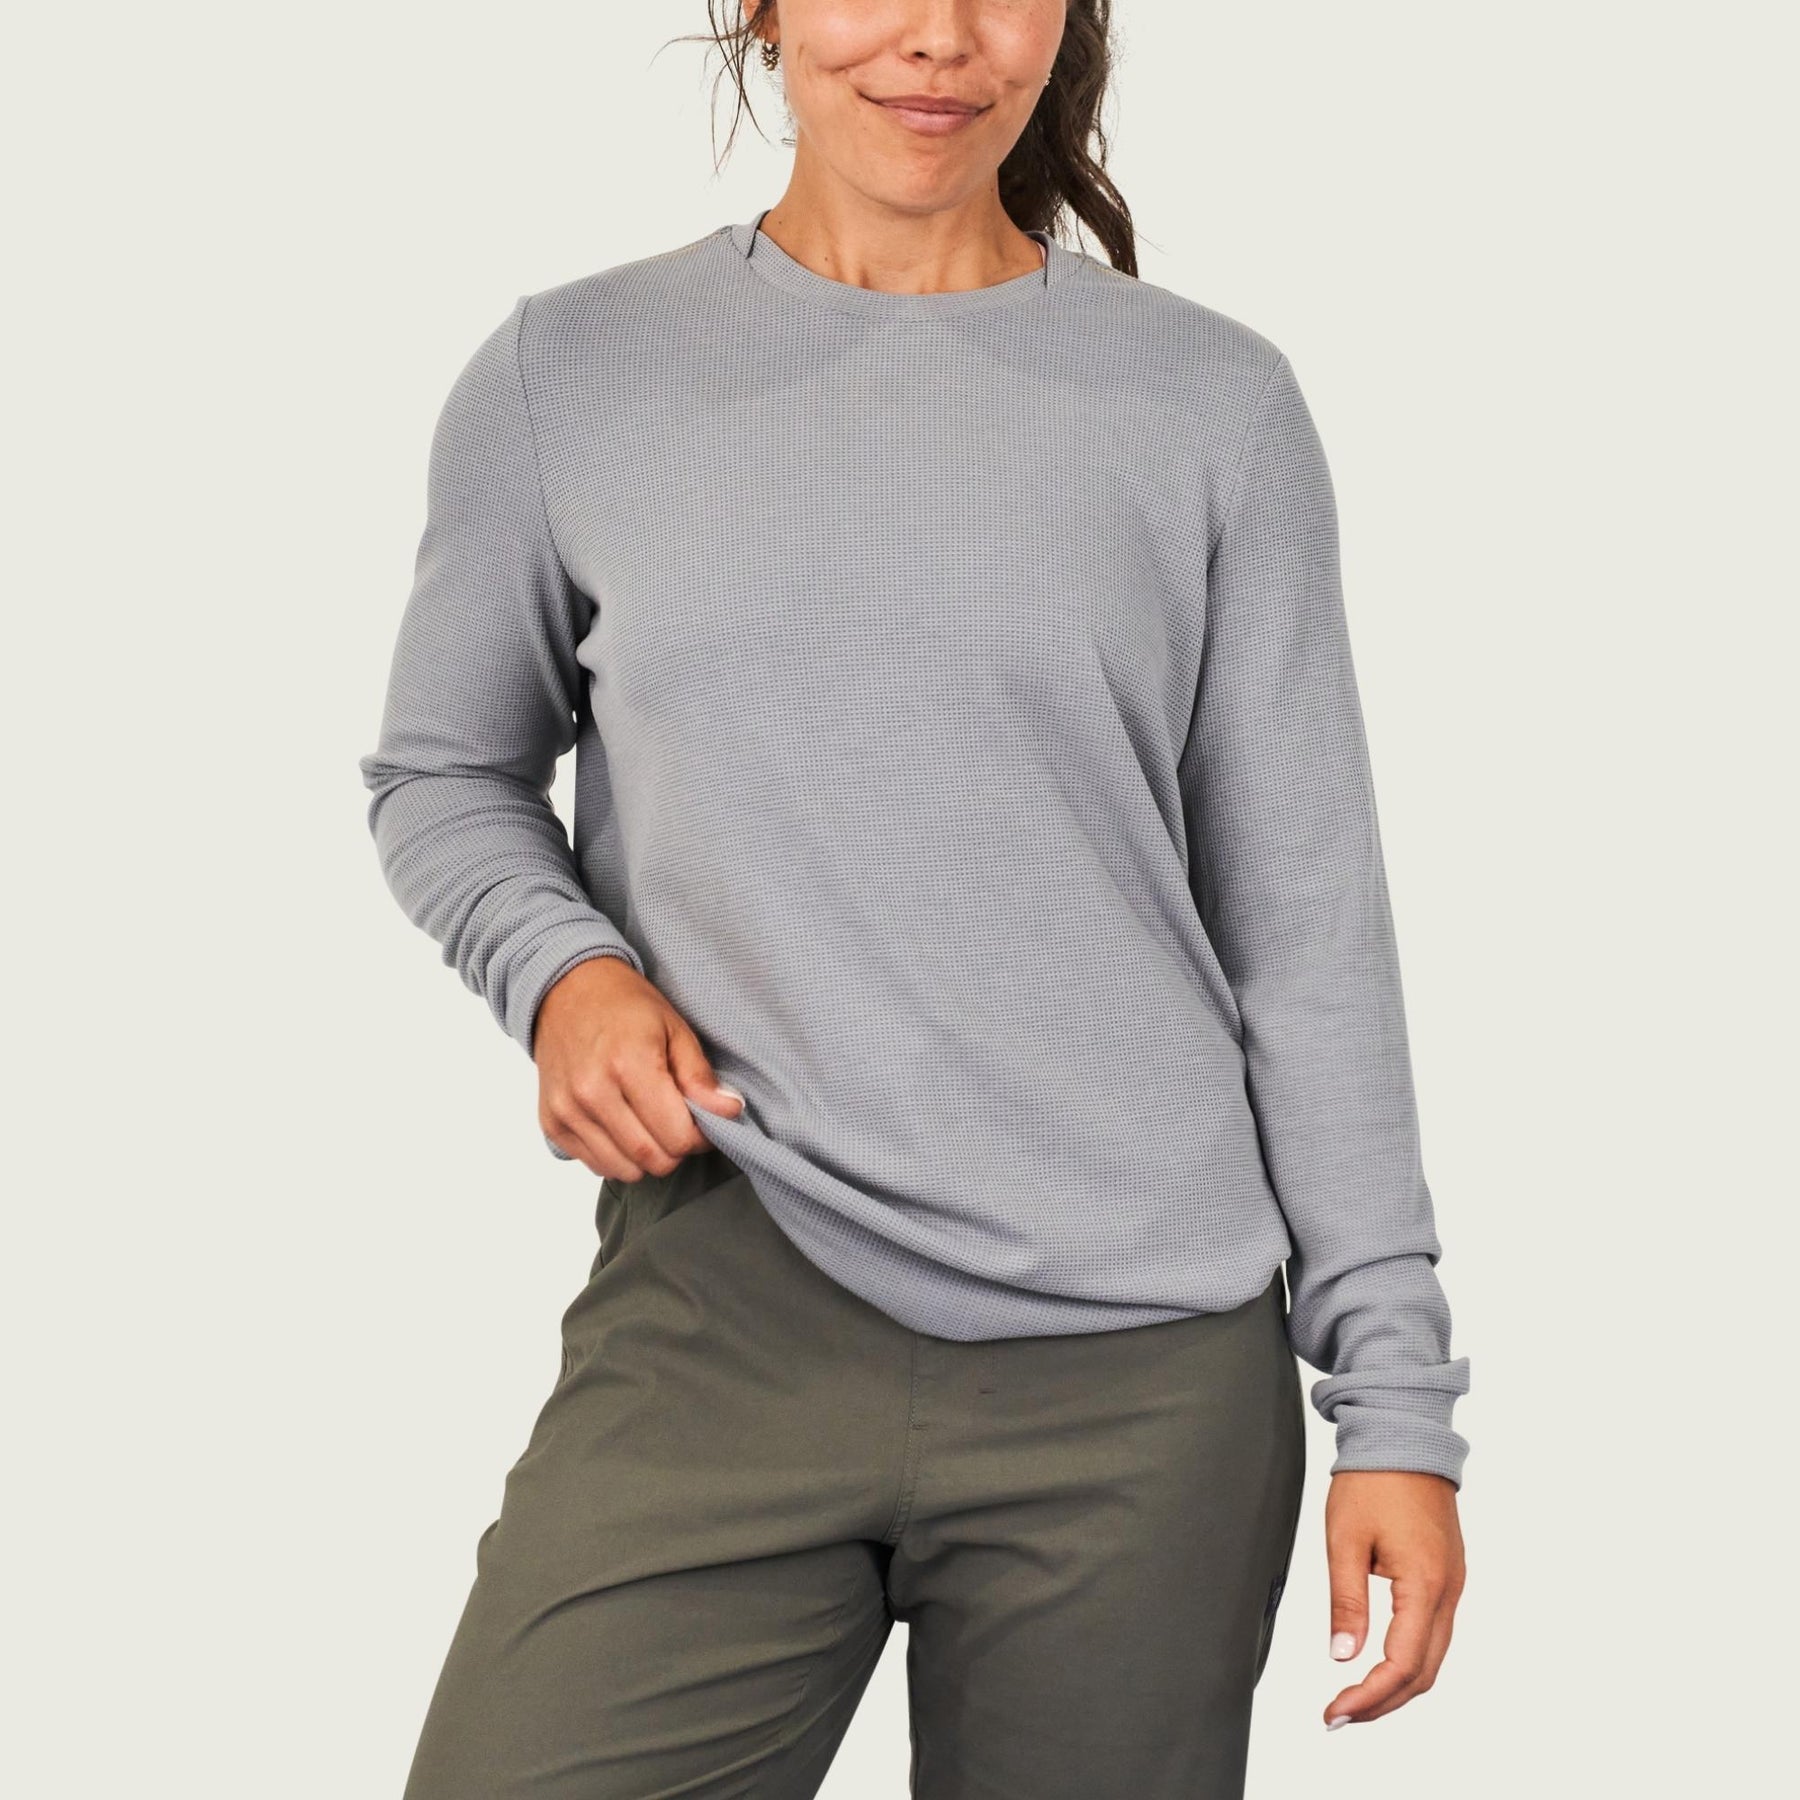 – Thermal Marsh Clothing Wear Crew Tyber